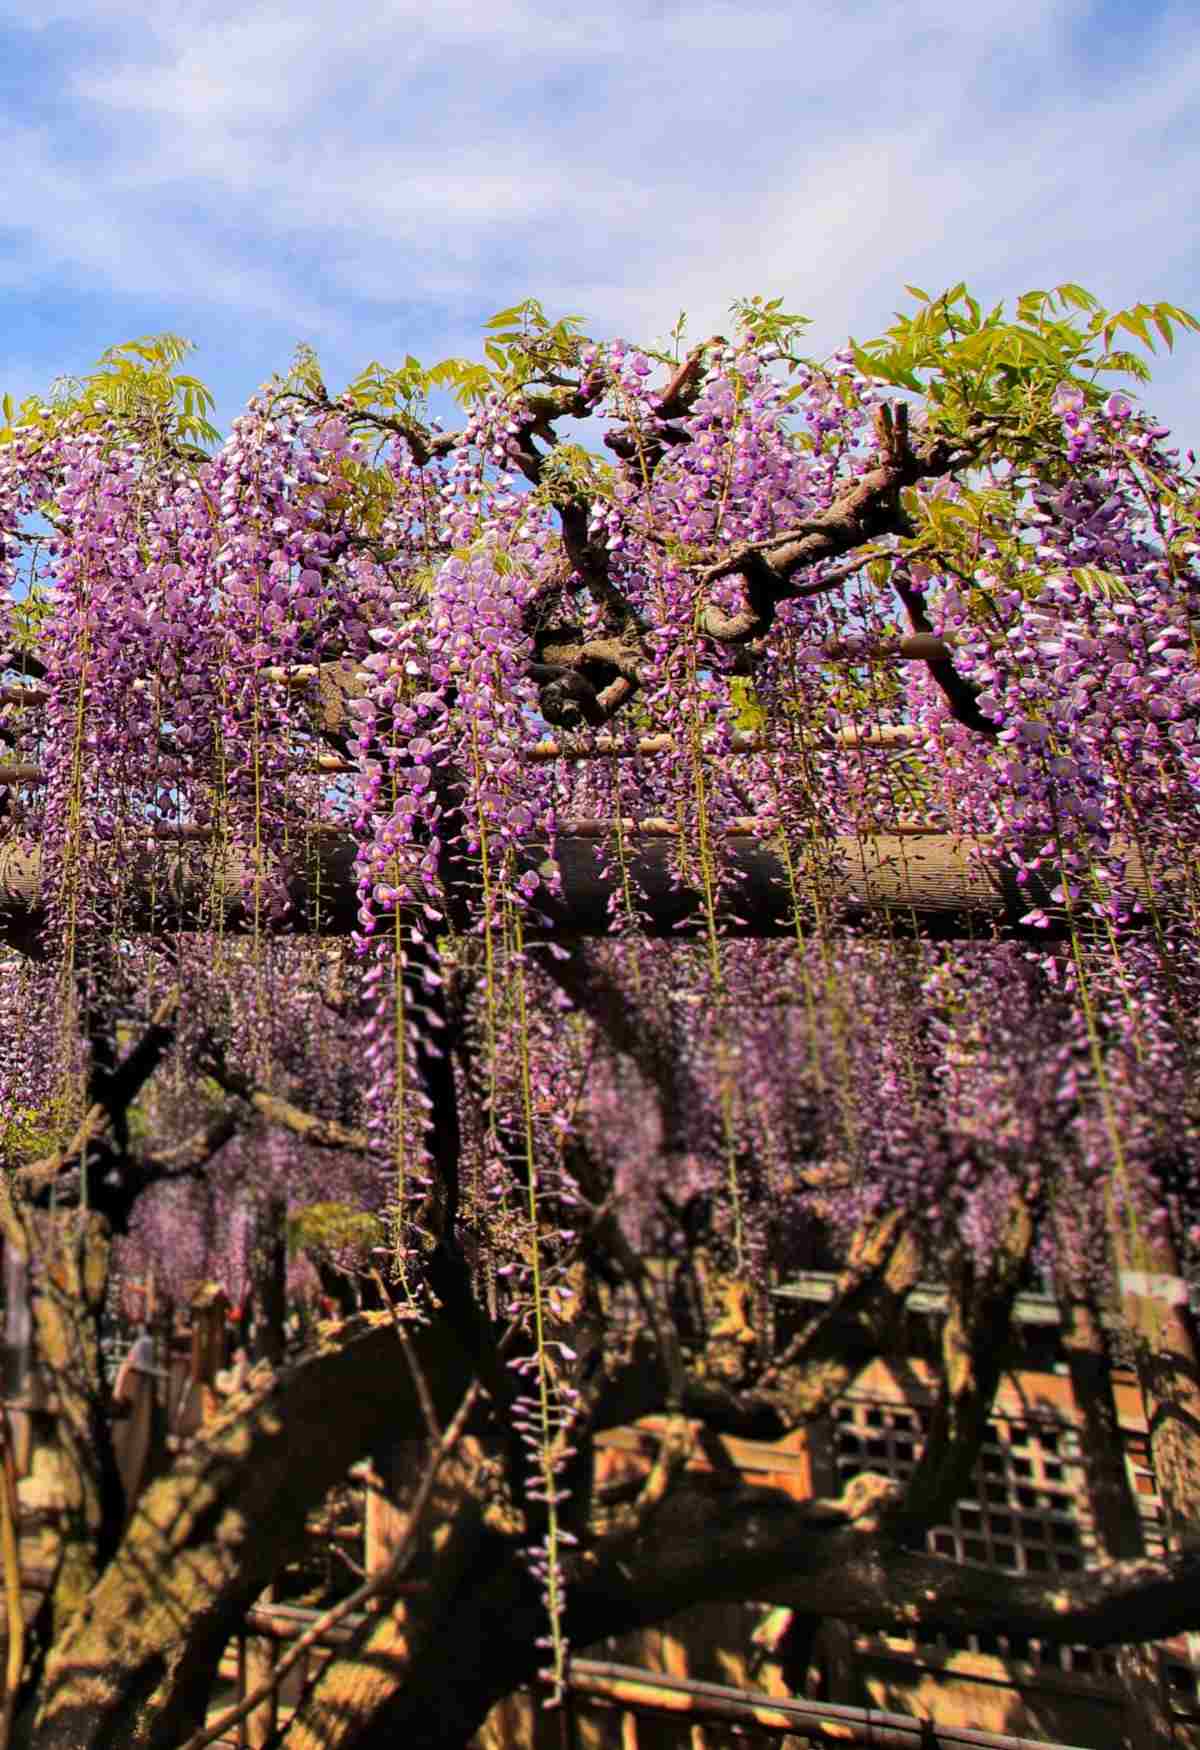 Giant pergola with wisteria dangling.